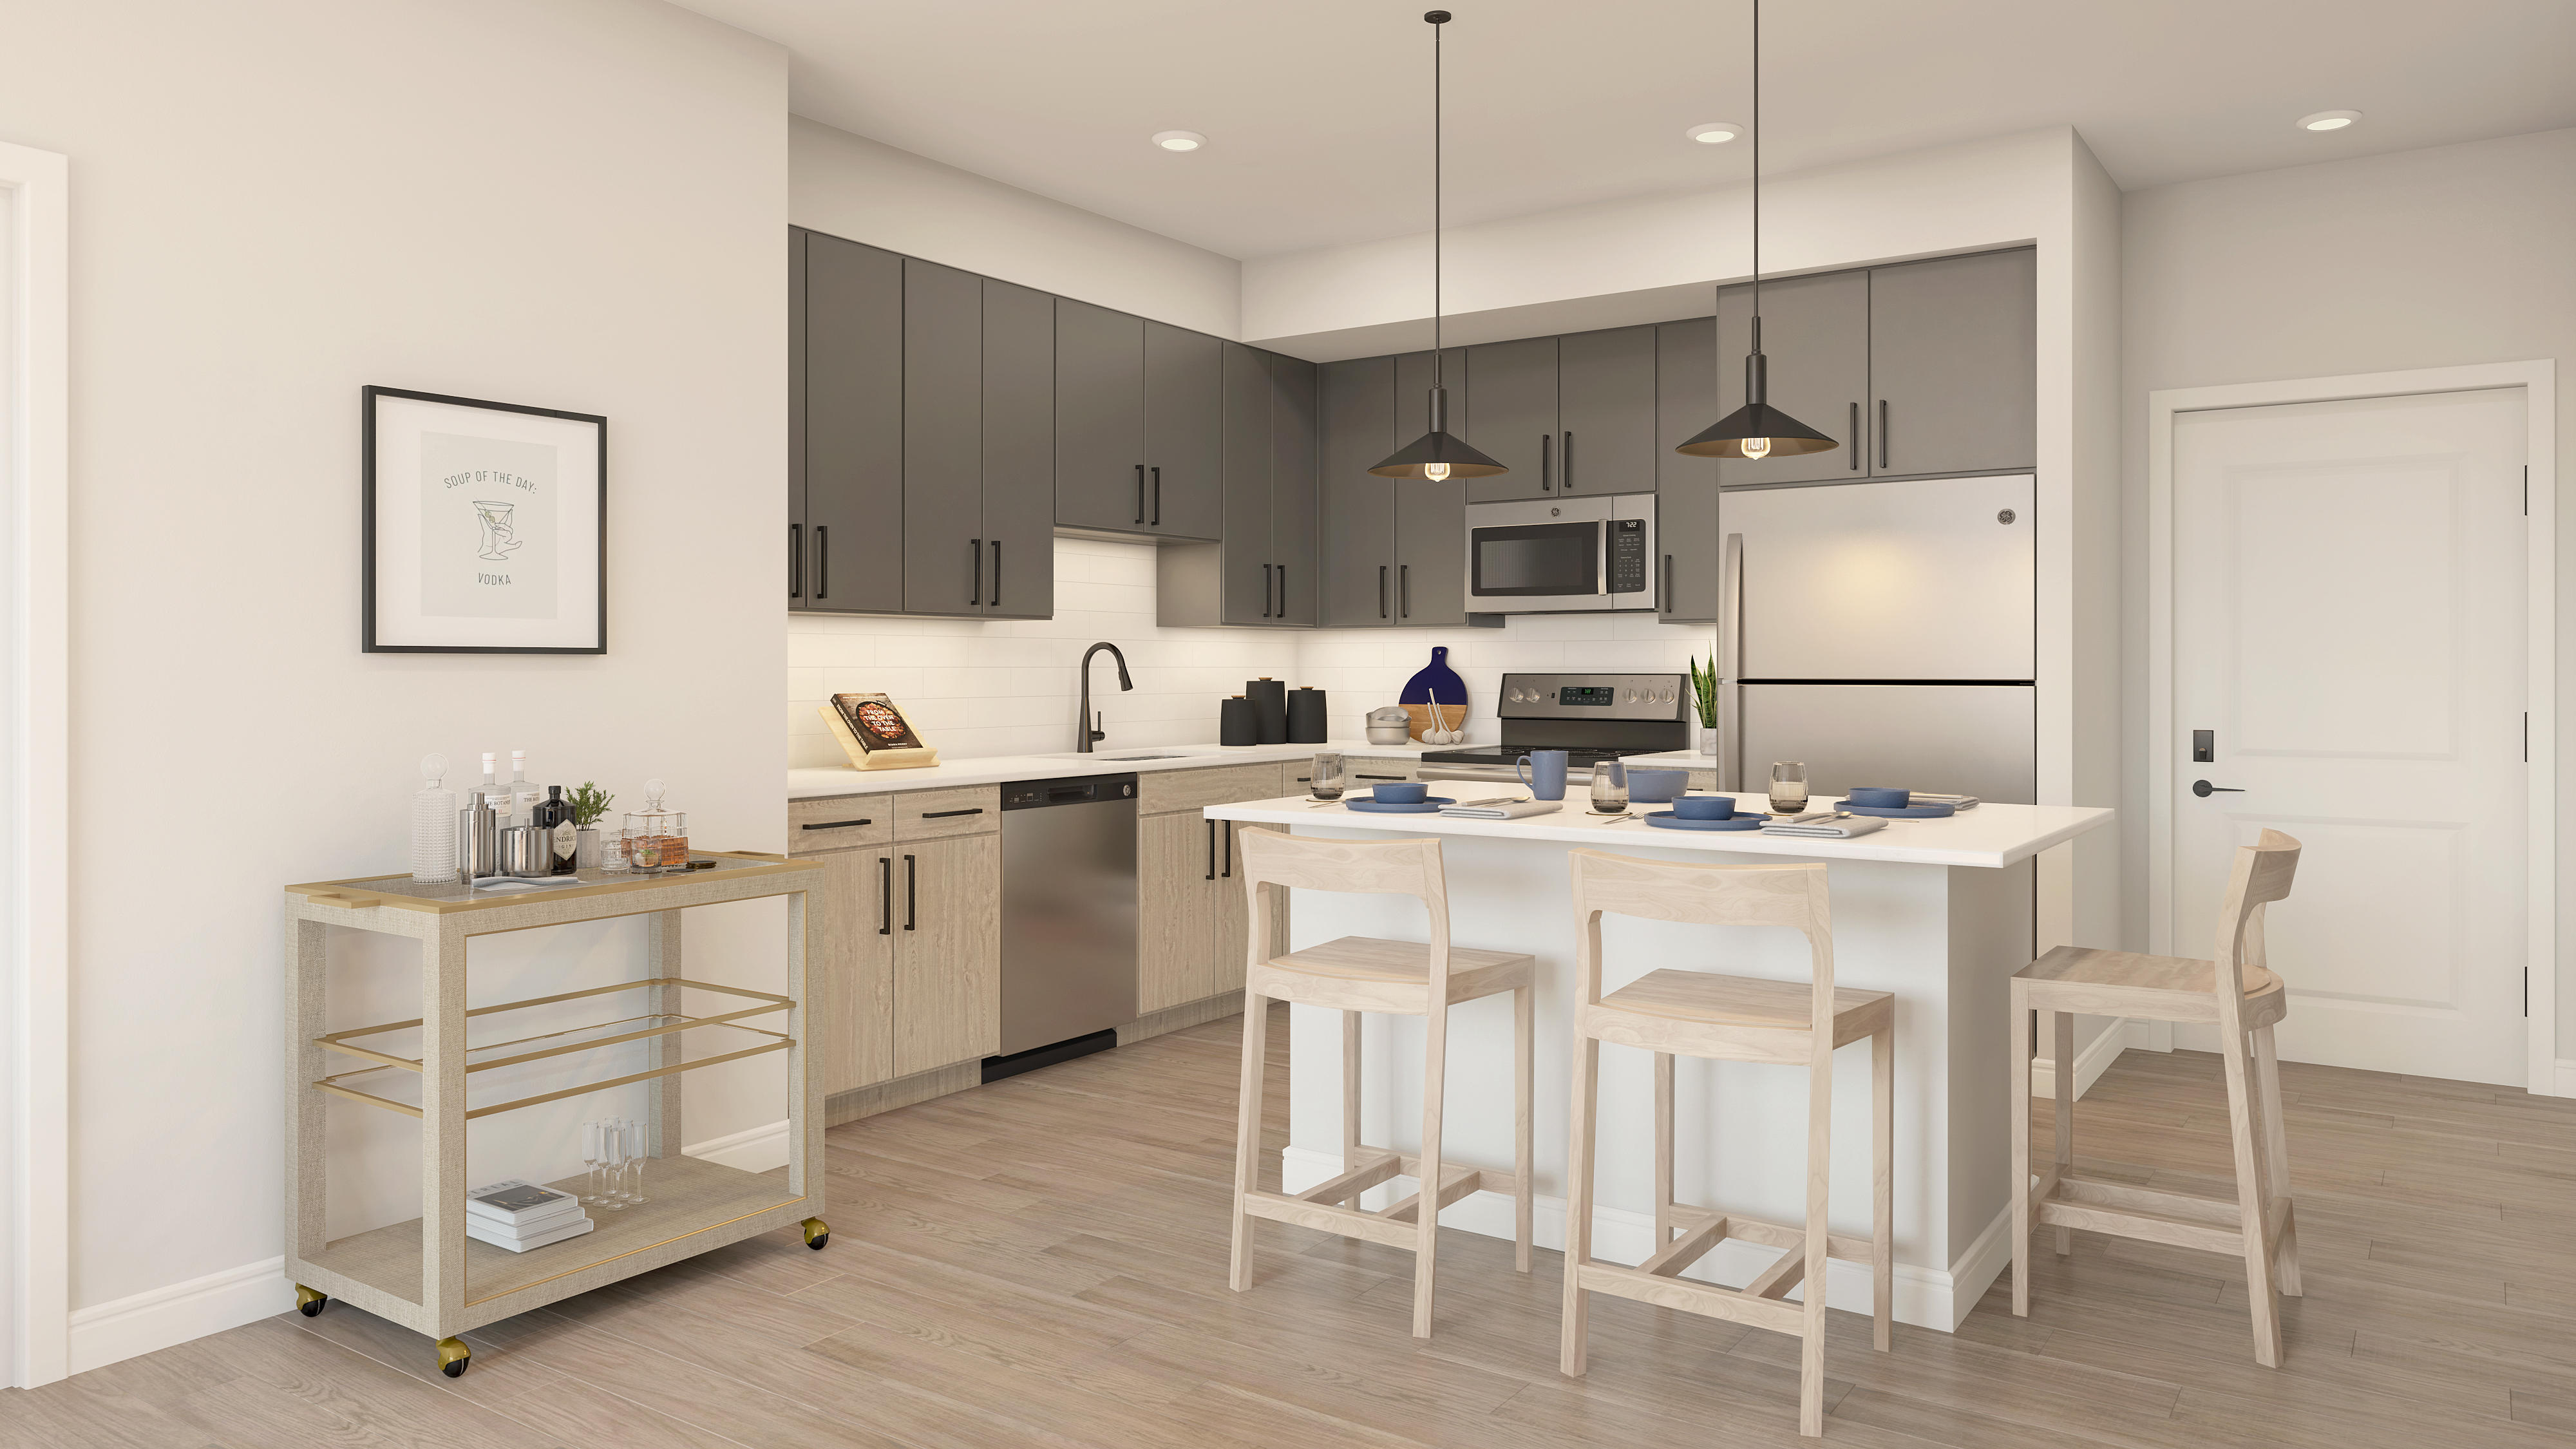 Apartment interior featuring chef-style kitchens with kitchen island, stainless steel appliances, dual-tone cabinetry and pendant lighting at The MARC luxury apartments in Palm Beach Gardens, FL